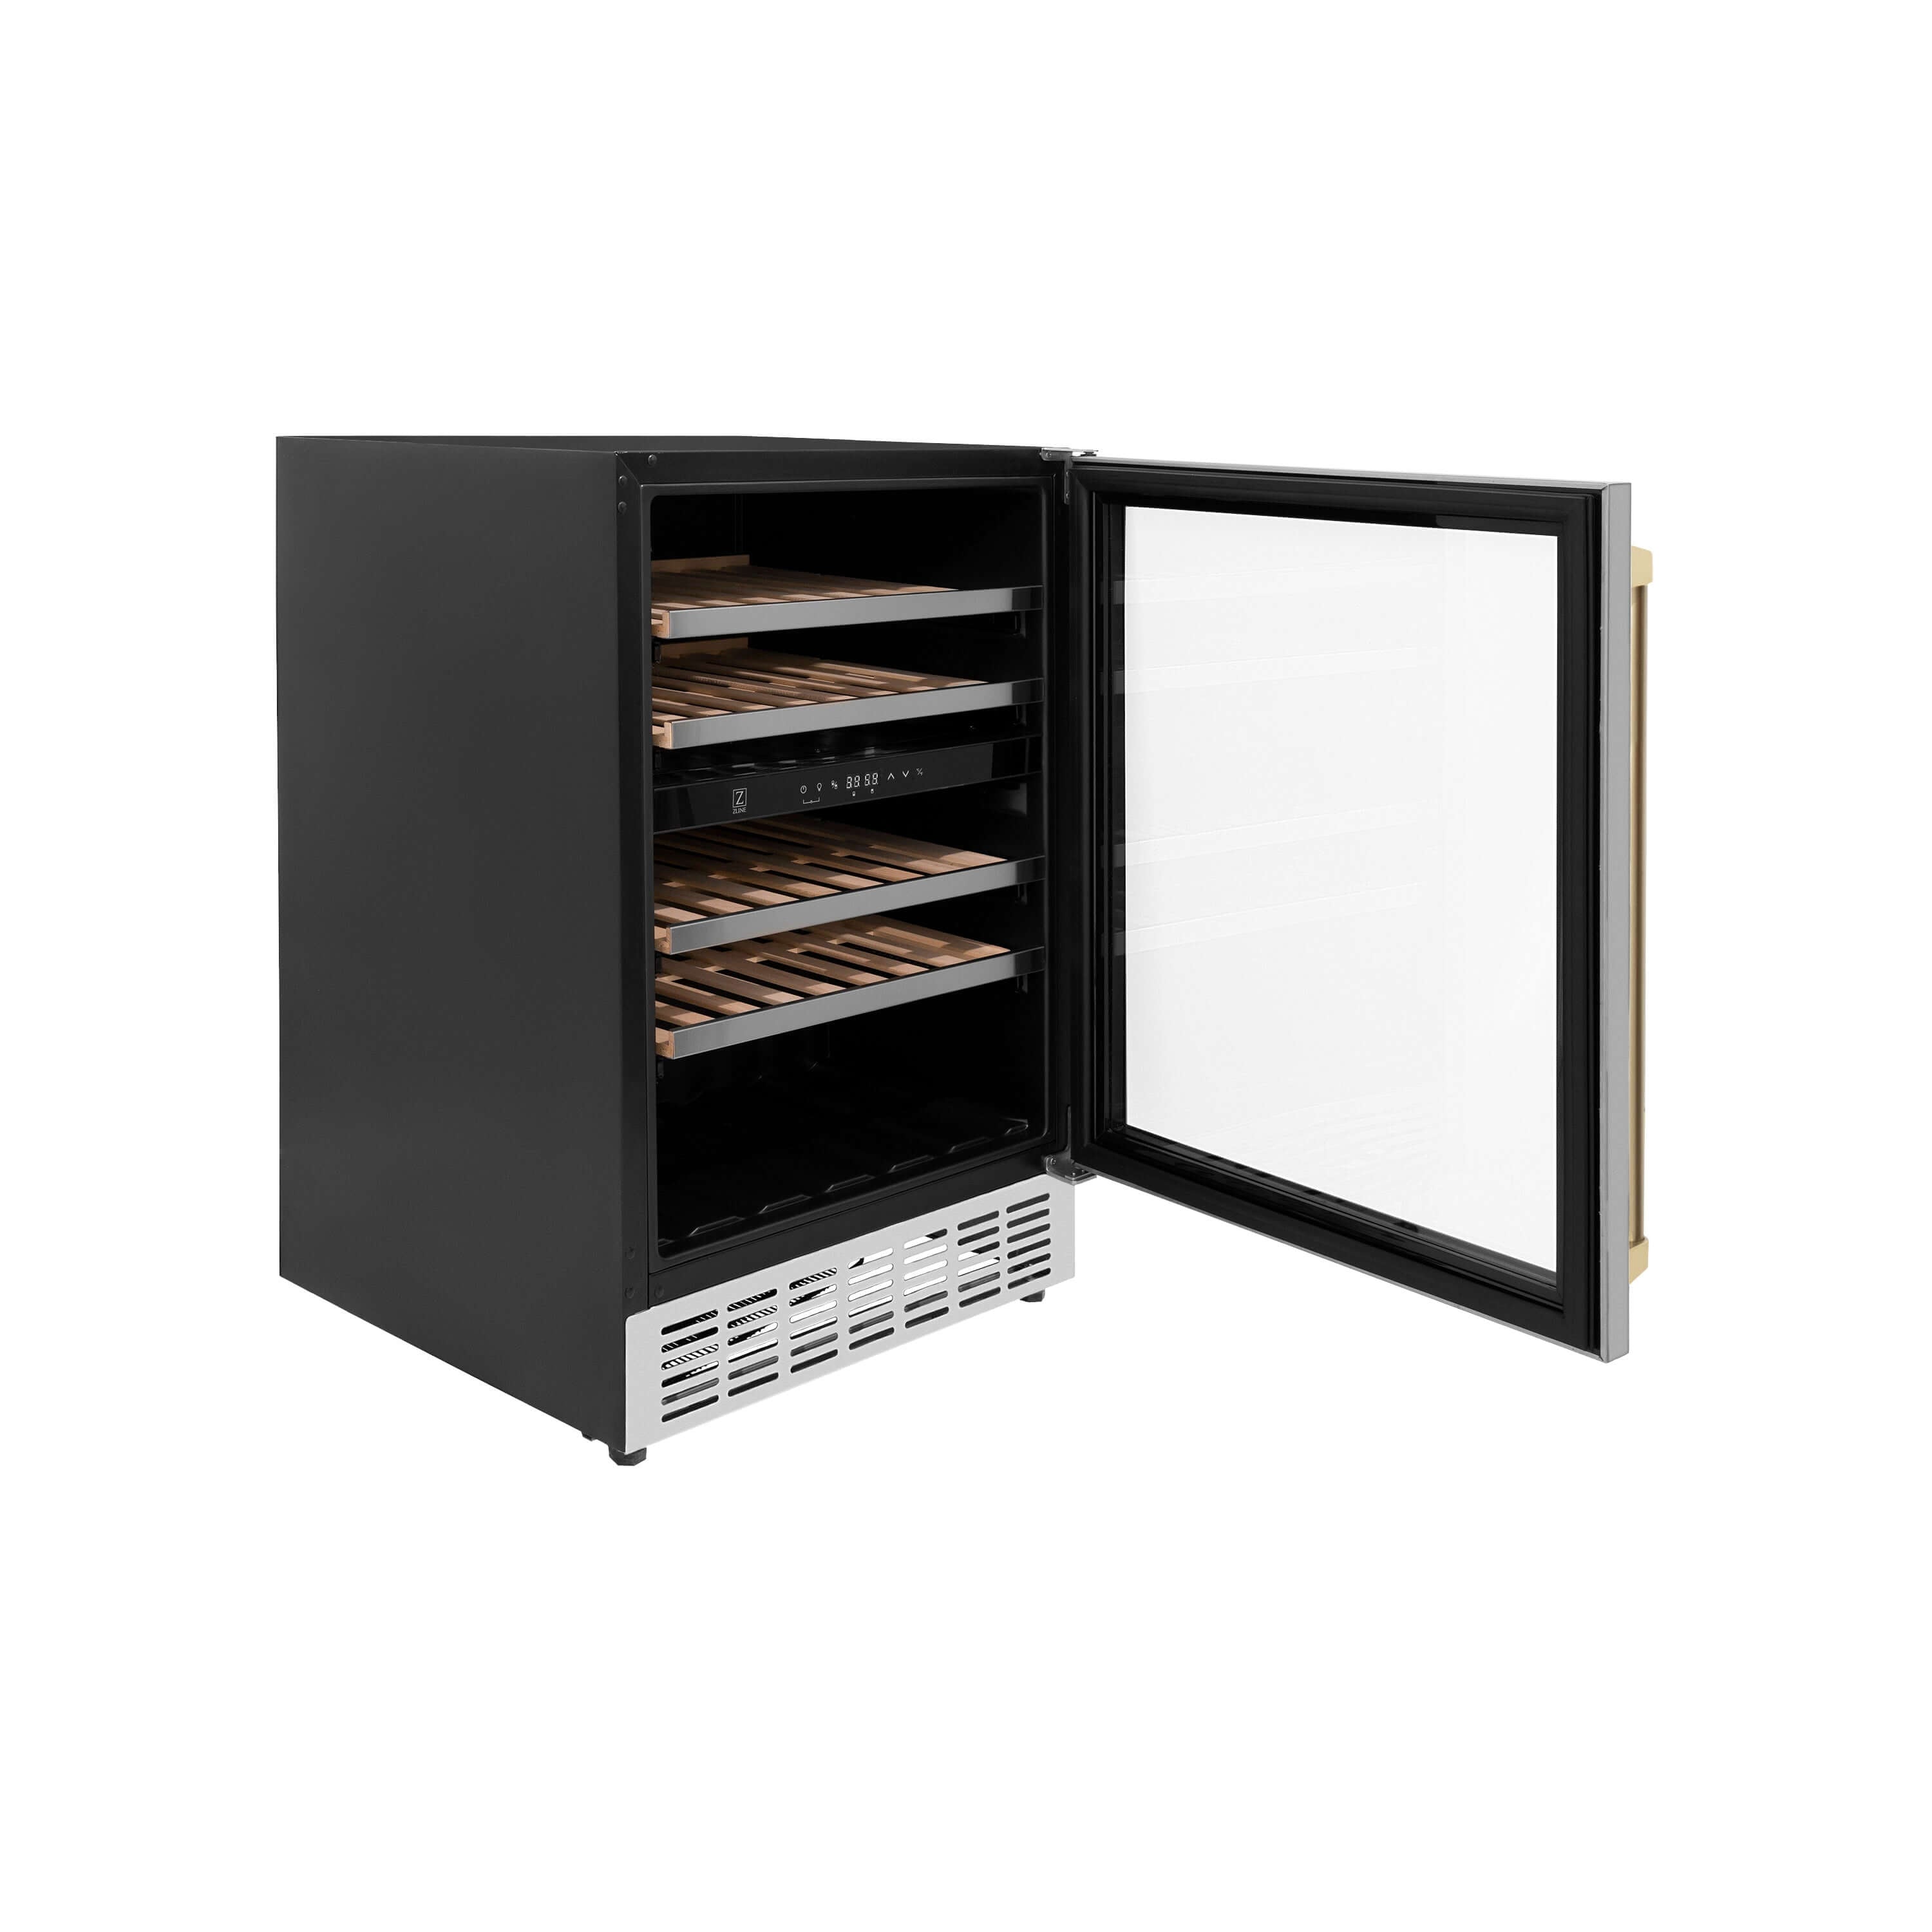 ZLINE Autograph Edition 24 in. Monument Dual Zone 44-Bottle Wine Cooler in Stainless Steel with Champagne Bronze Accents (RWVZ-UD-24-CB) side, door open.